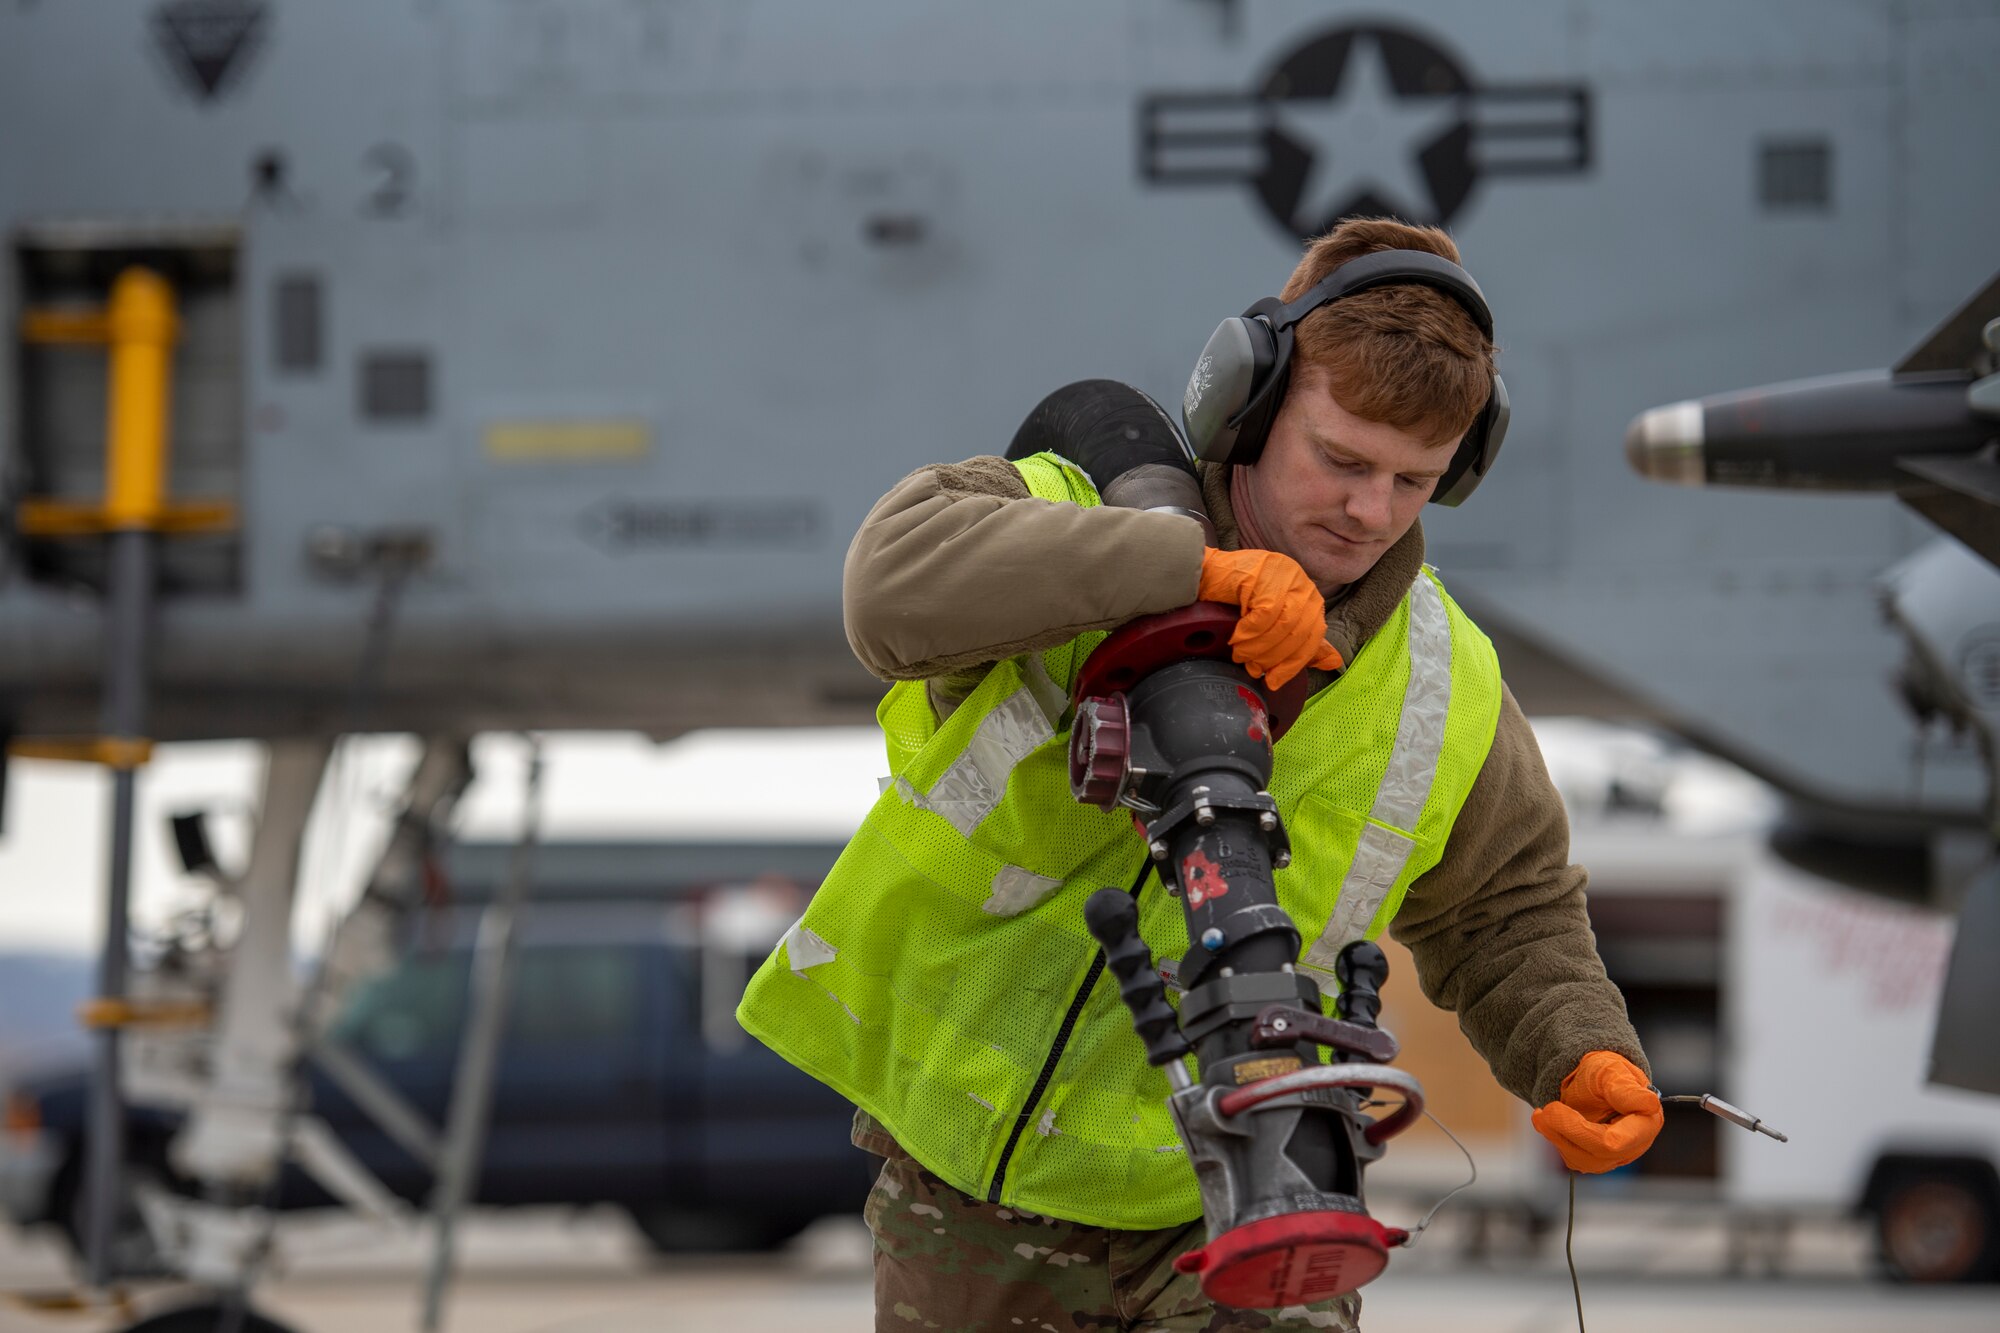 Airman wearing neon green vest pulls a large fuel hose away from an aircraft over his shoulder